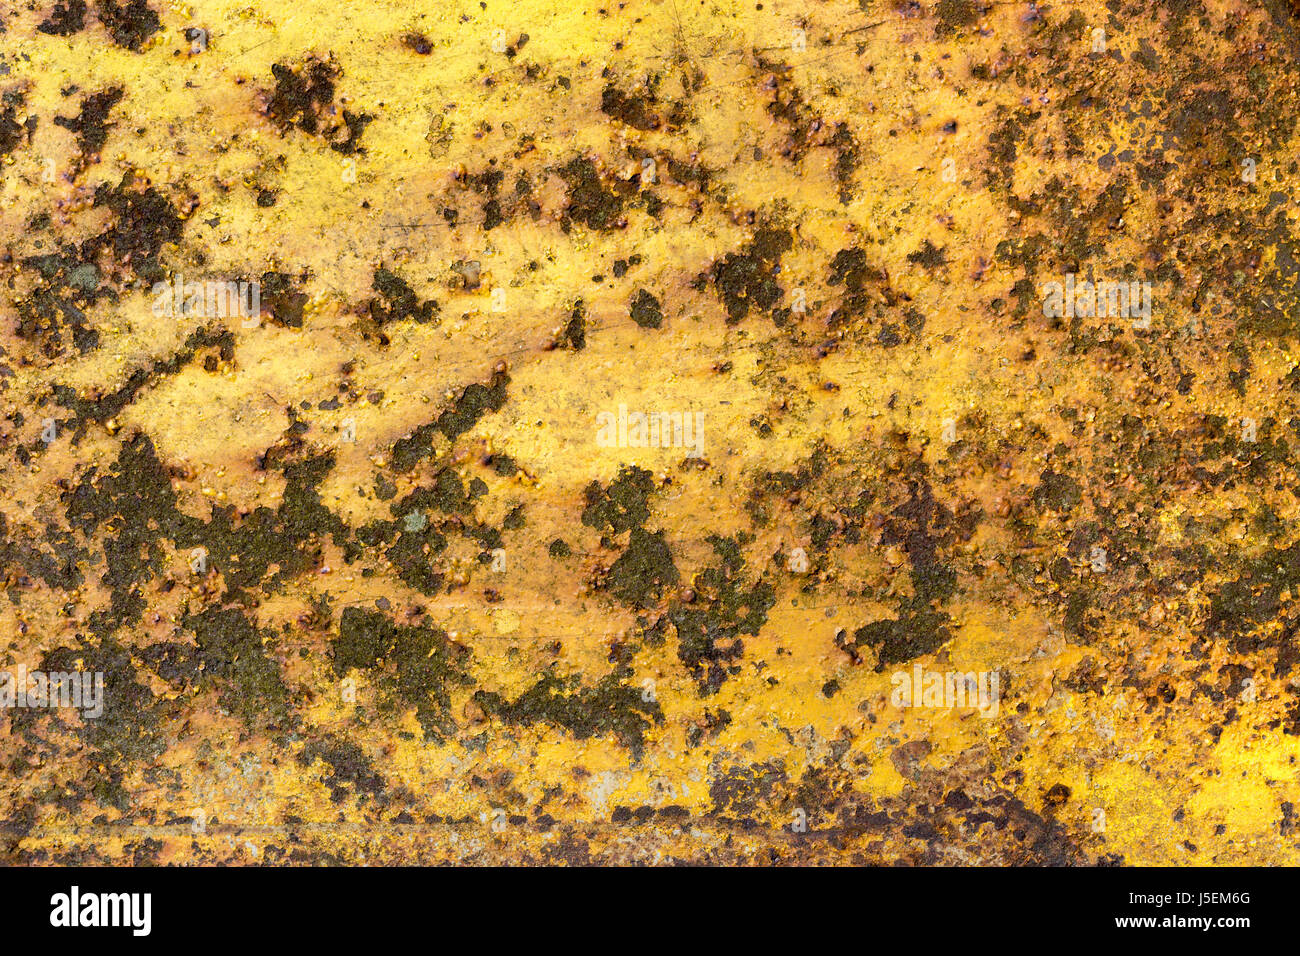 Rusty iron metal surface with yellow paint. Texture and background Stock Photo